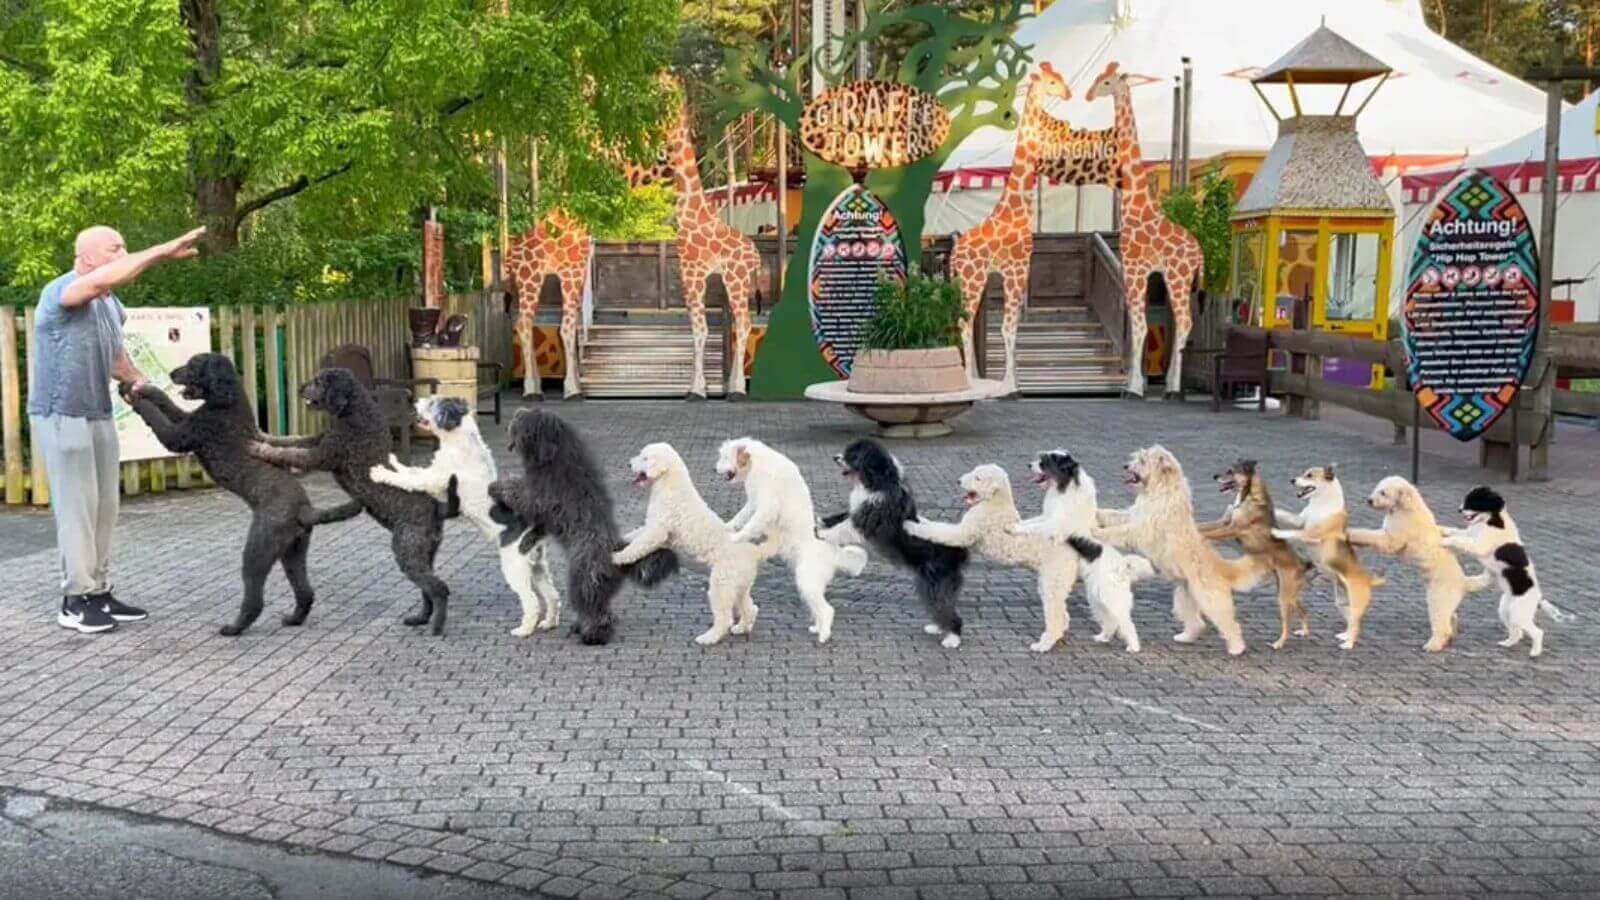 cool pics and photos - most dogs in a conga line